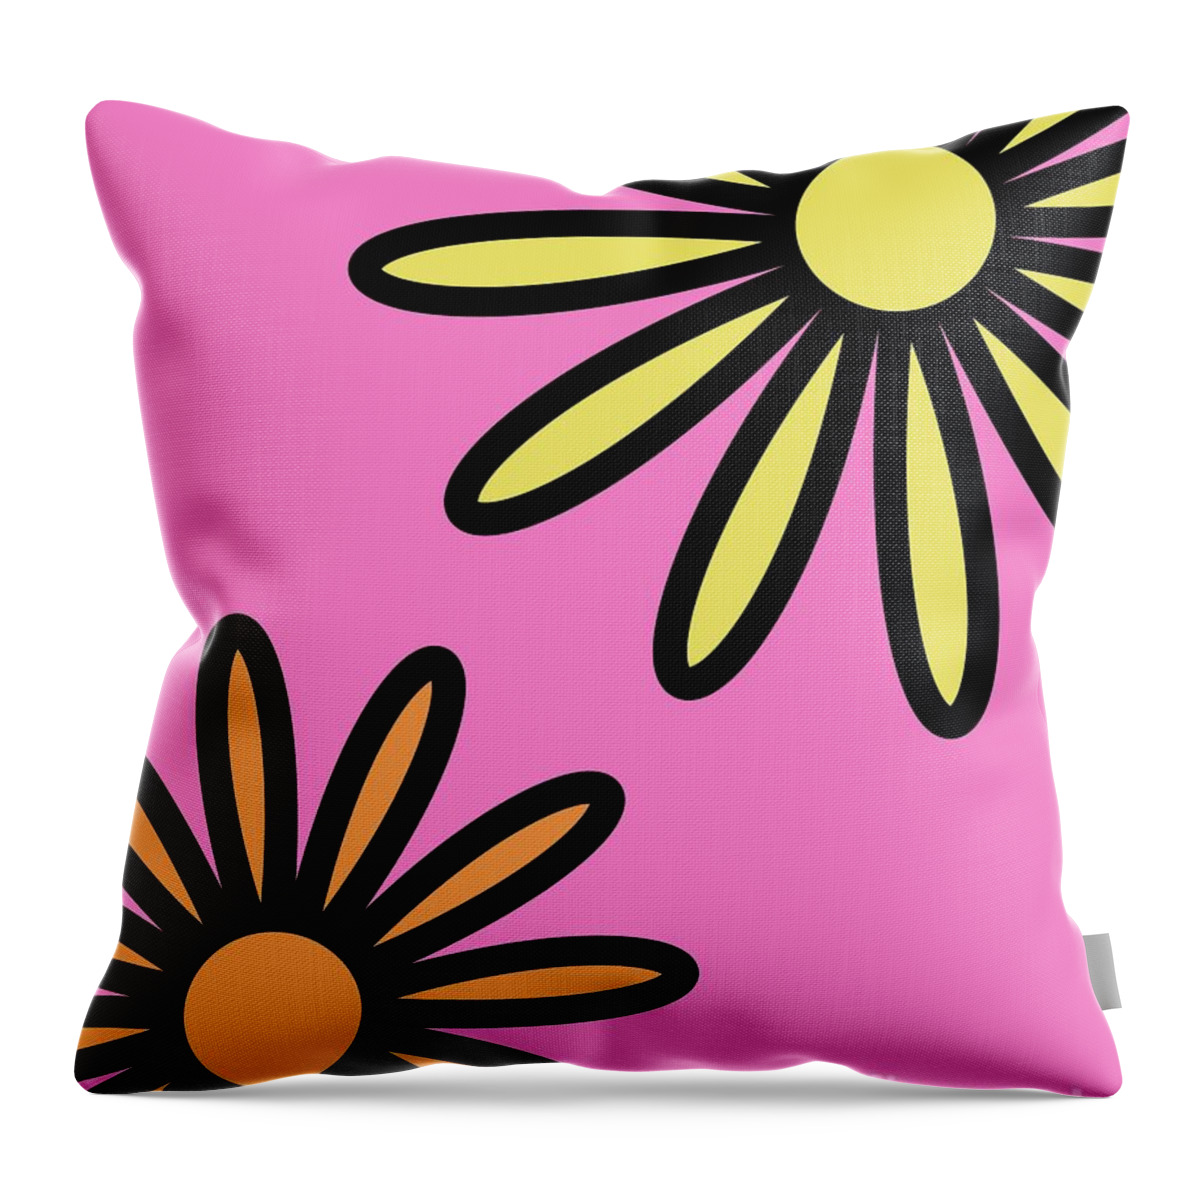 Mod Throw Pillow featuring the digital art Mod Flowers 2 on Pink by Donna Mibus